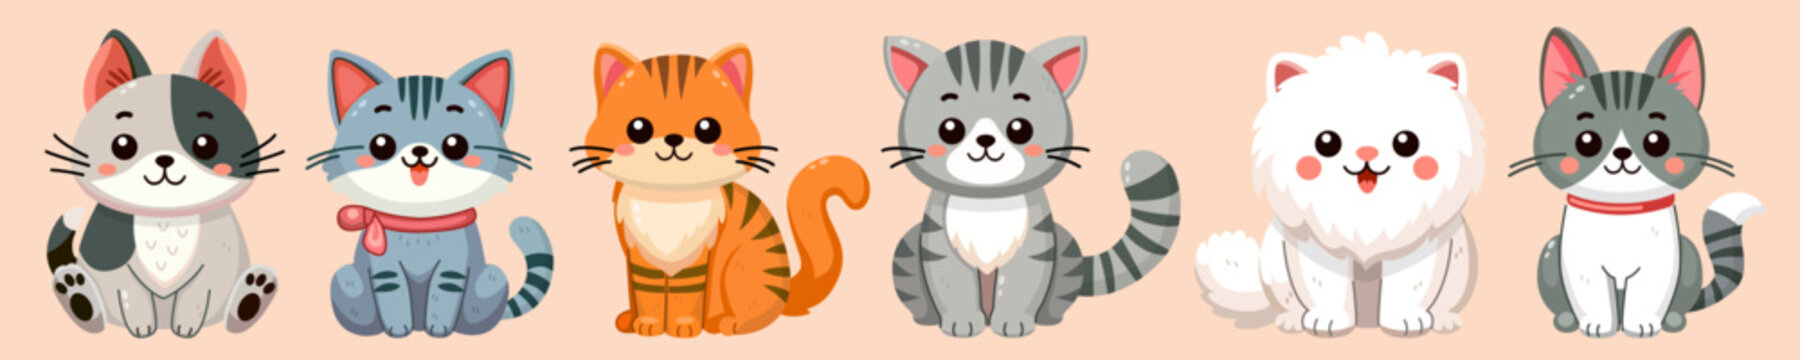 Cute and smile cats set, doodle pets friends. Collection of funny adorable cats or fluffy kittens cartoon character design with flat color. Pets companions friendship. Illustration for sticker, print.